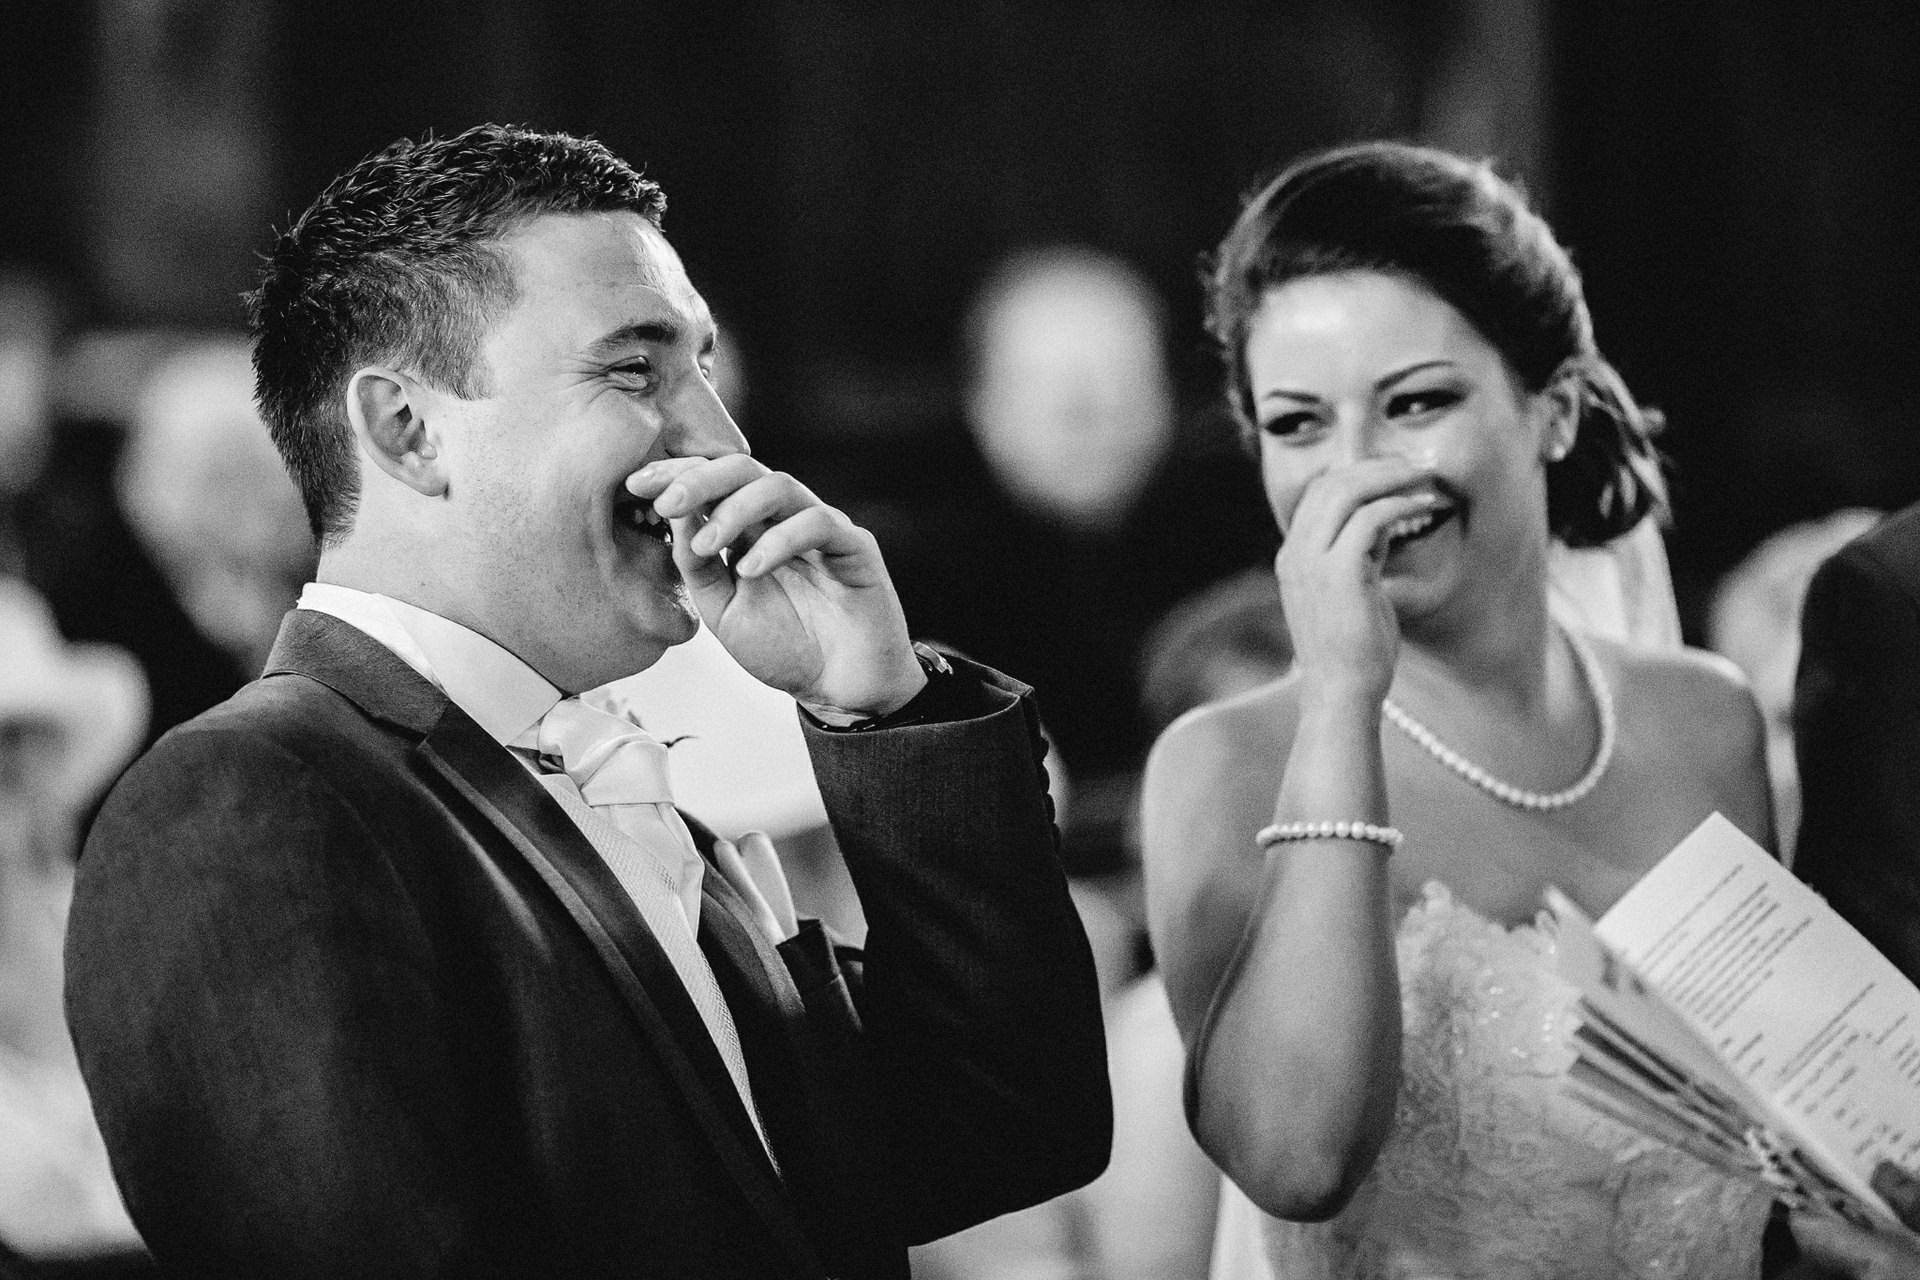 nervous laughter between the bride and groom 